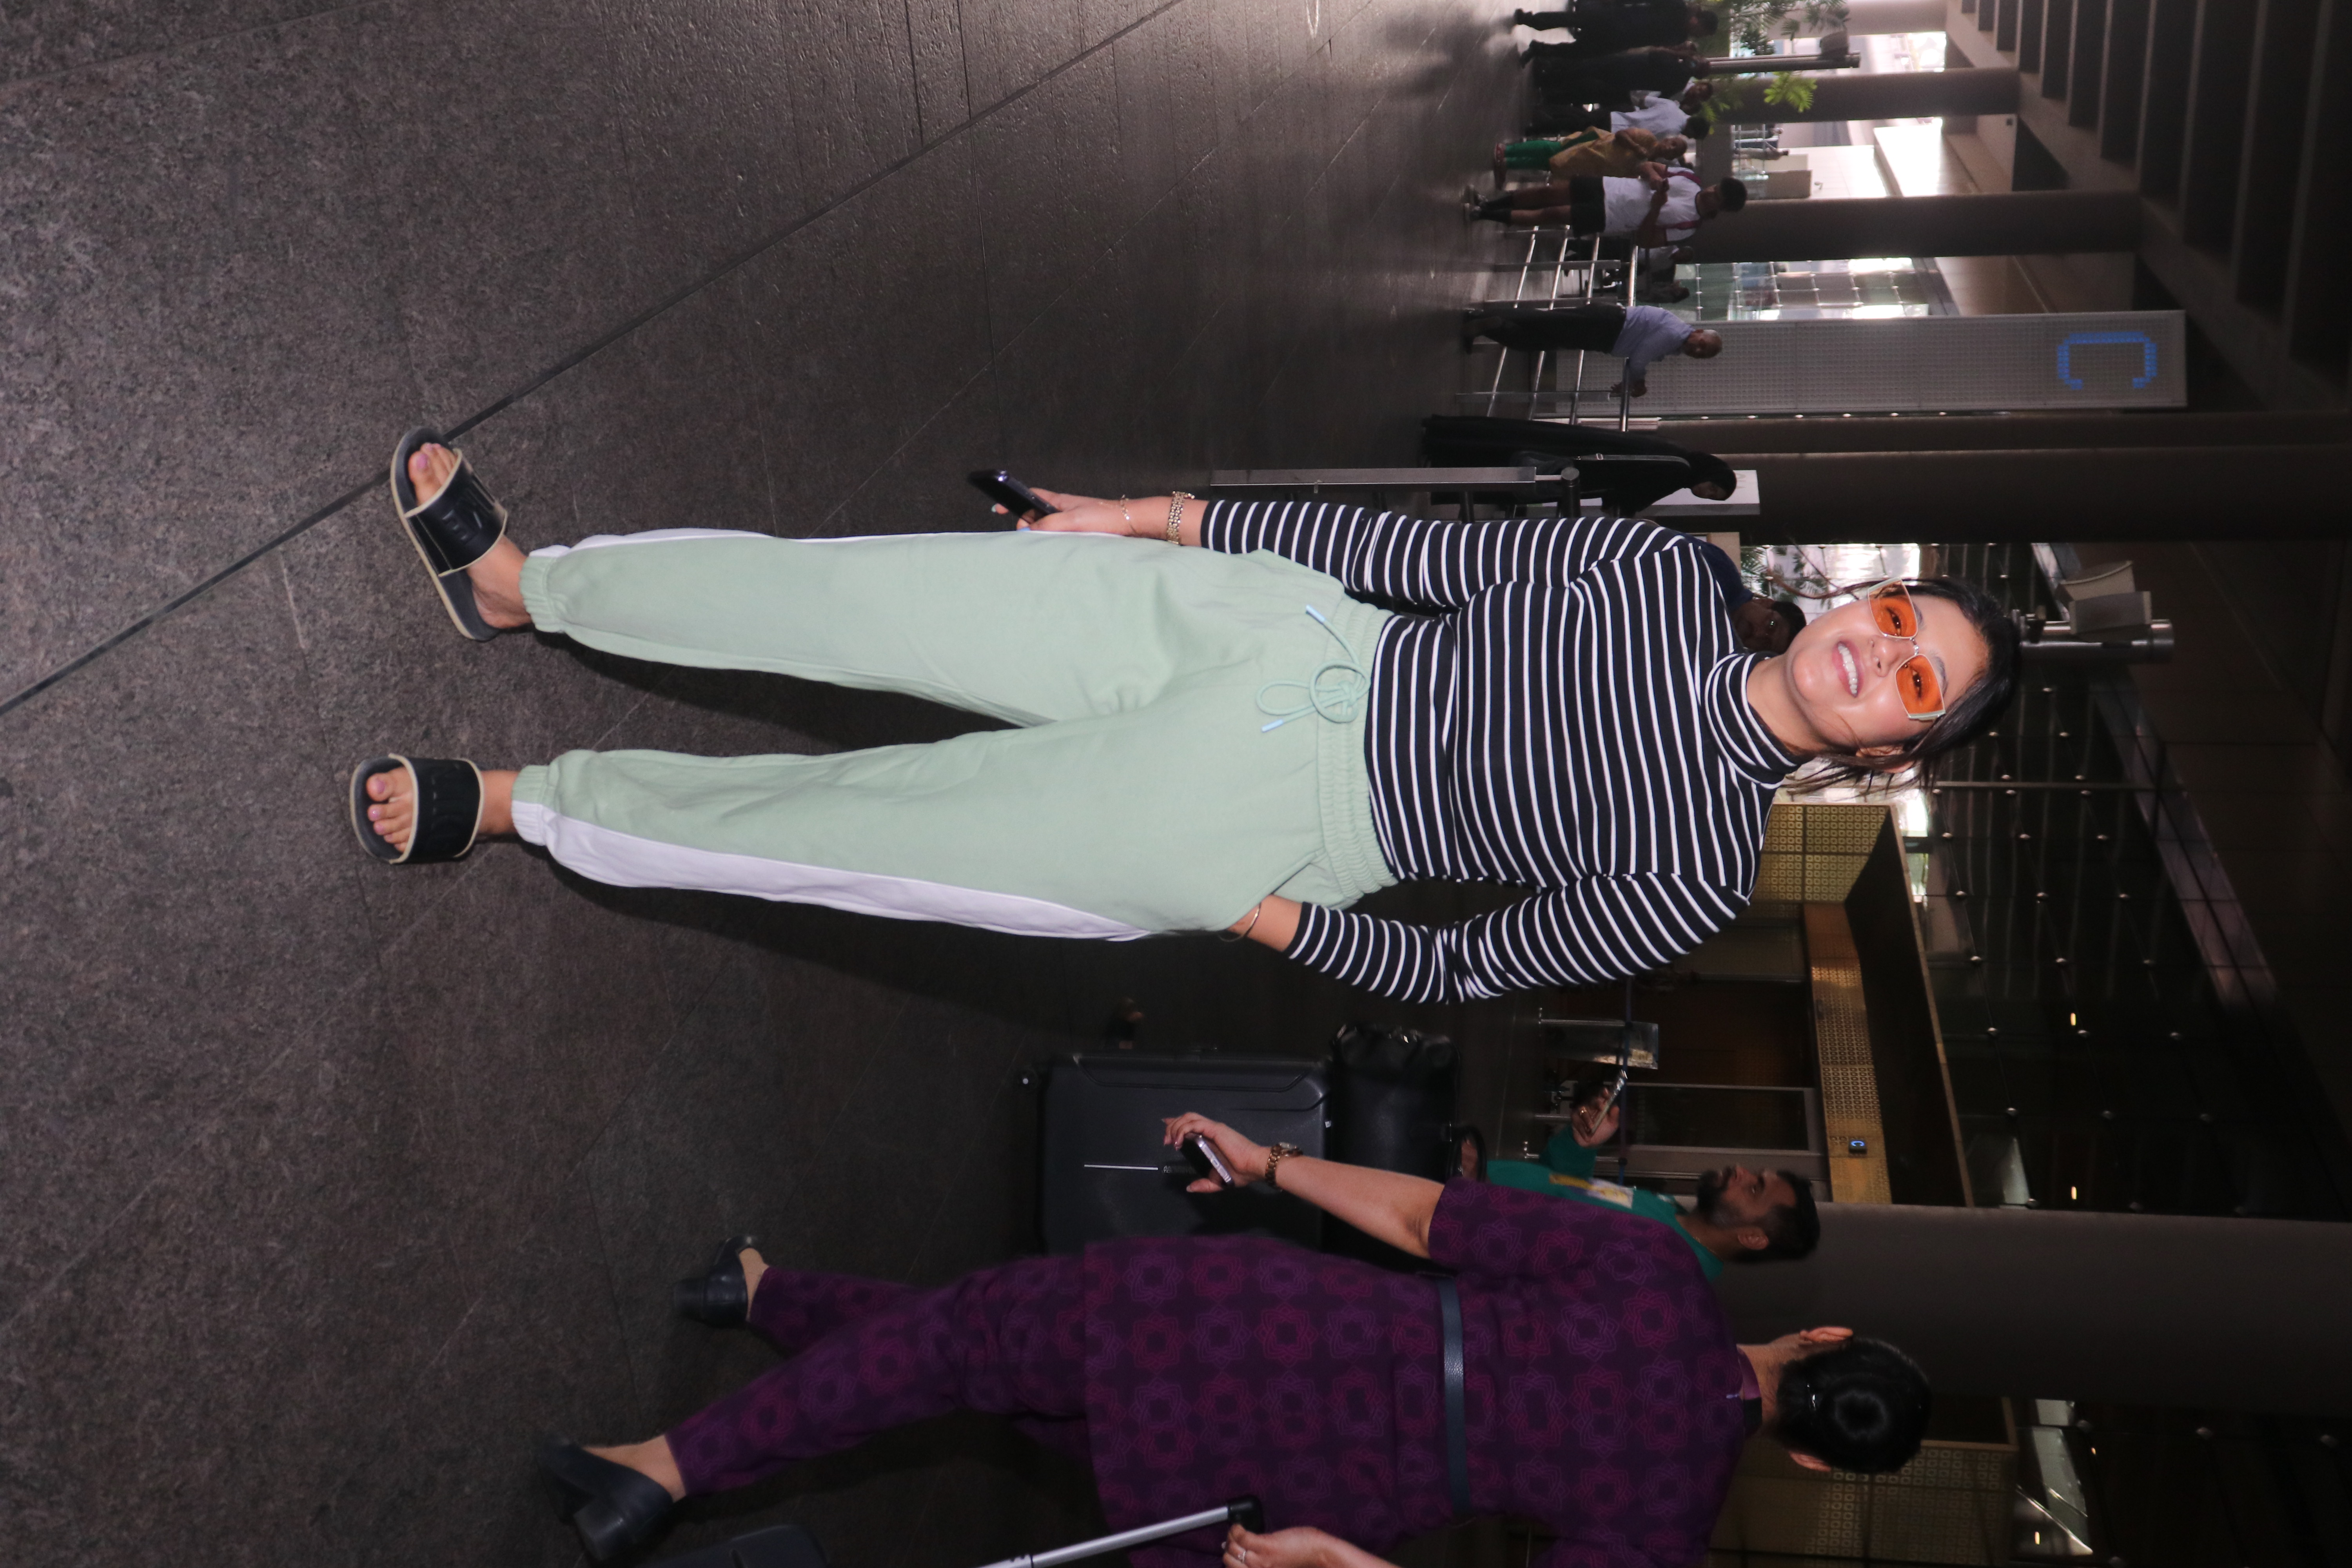 Anjali Arora seen at the airport.